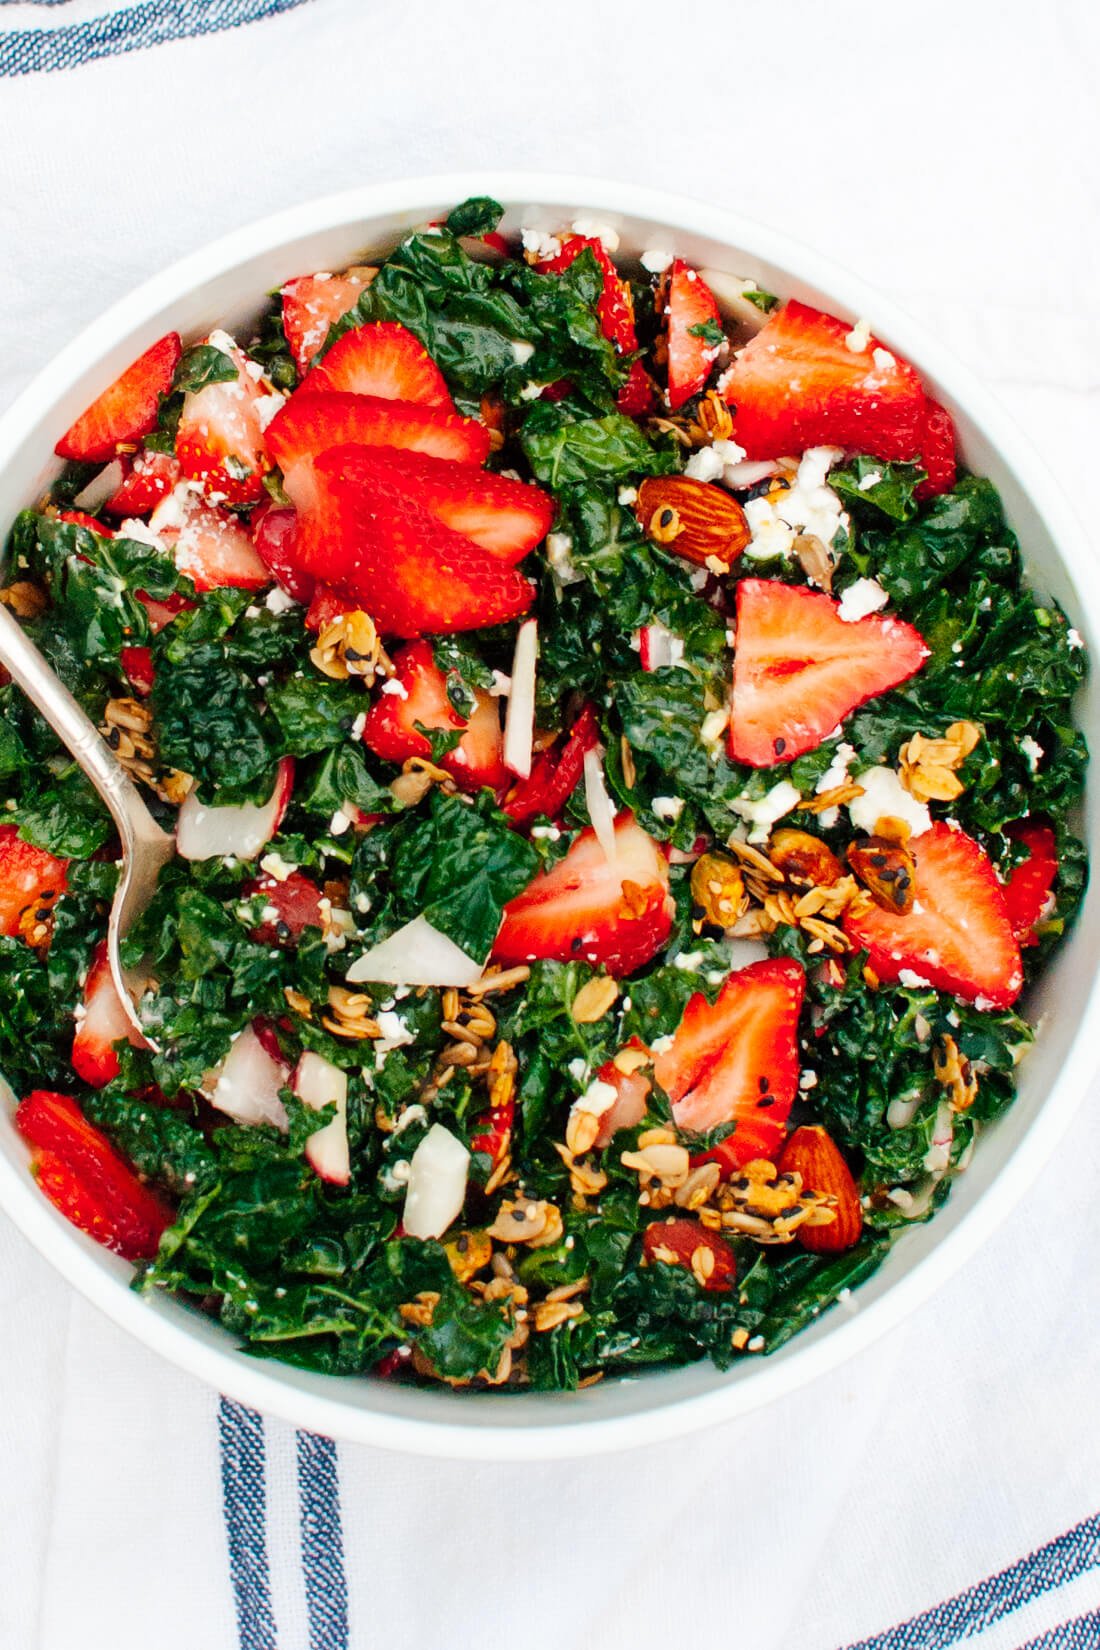 Strawberry Kale Salad with Nutty Granola Croutons recipe